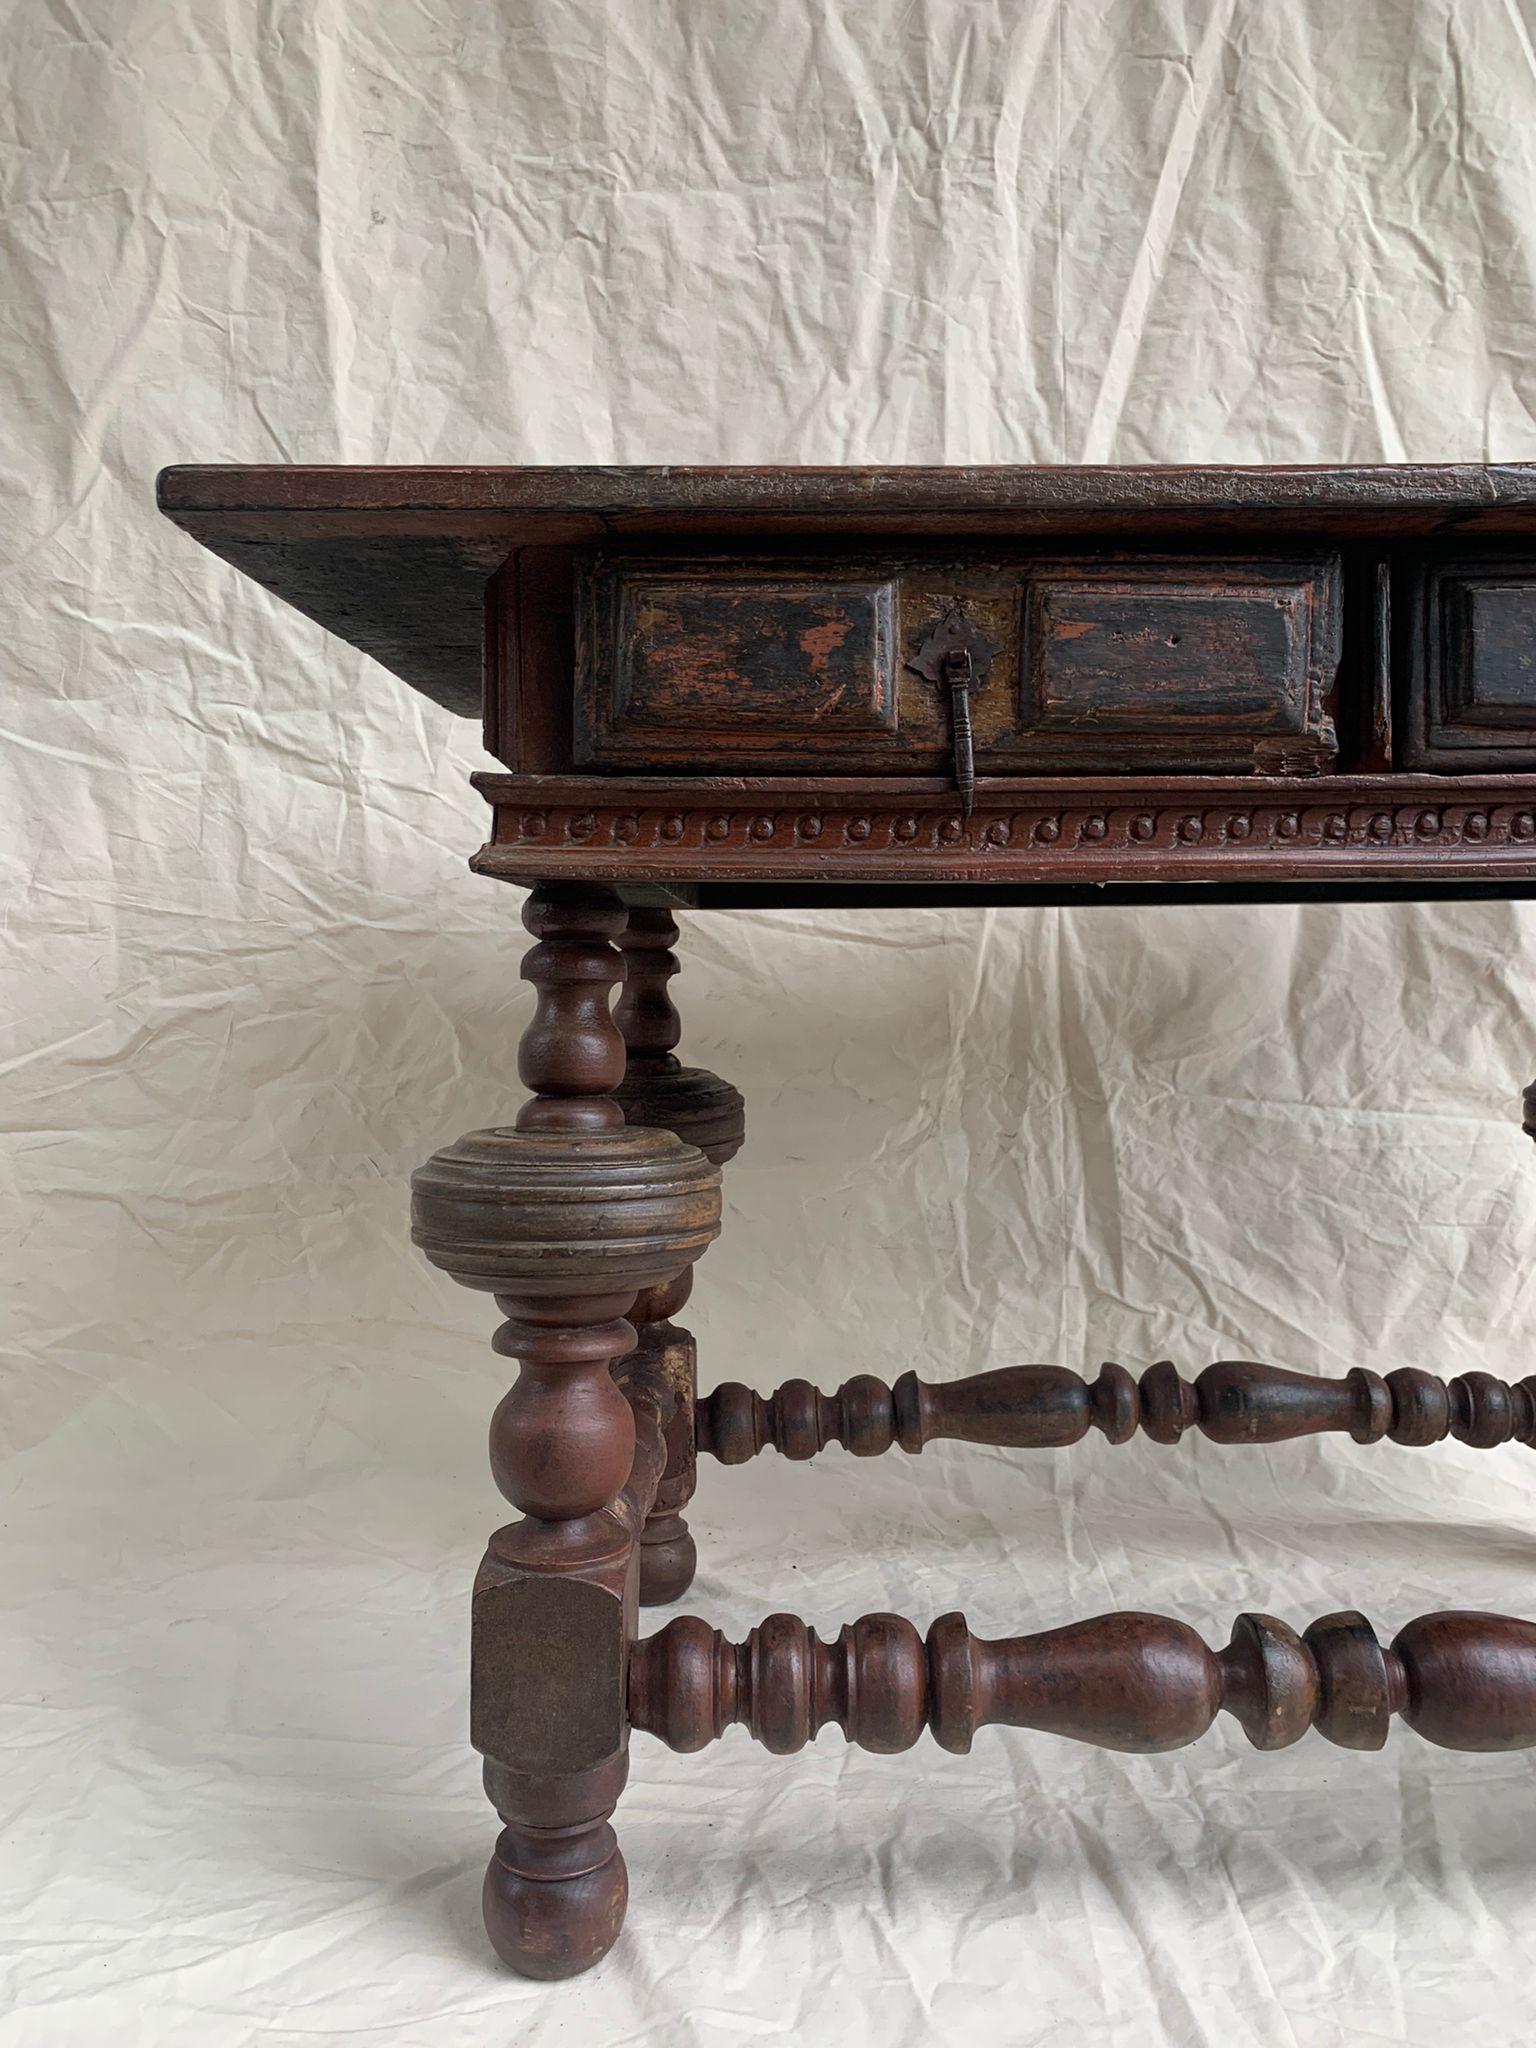 A seventeenth-century buffet with traces of old painting, from the private collection of Professor José Herman Saraiva, would be a piece of antique furniture of Portuguese origin, dating from the seventeenth century and that presents indications of